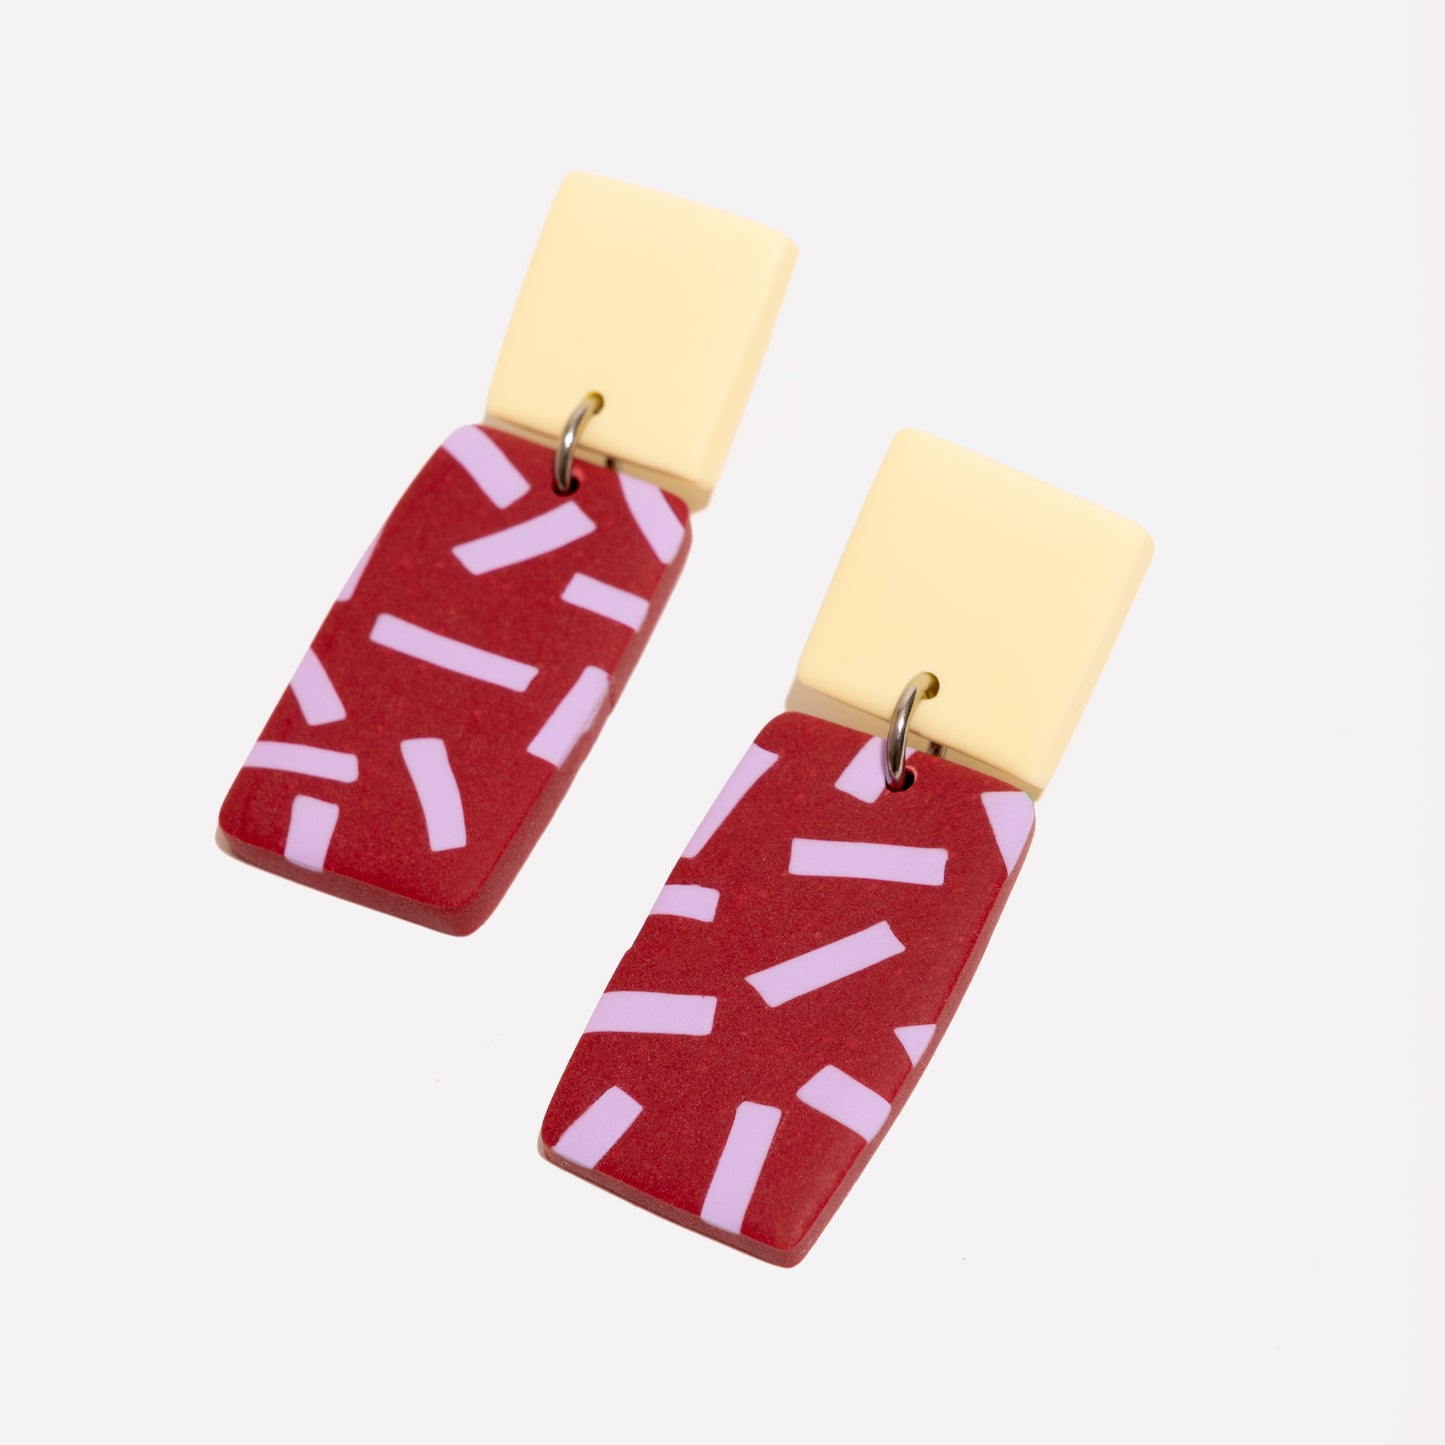 Limited 'The office' earrings